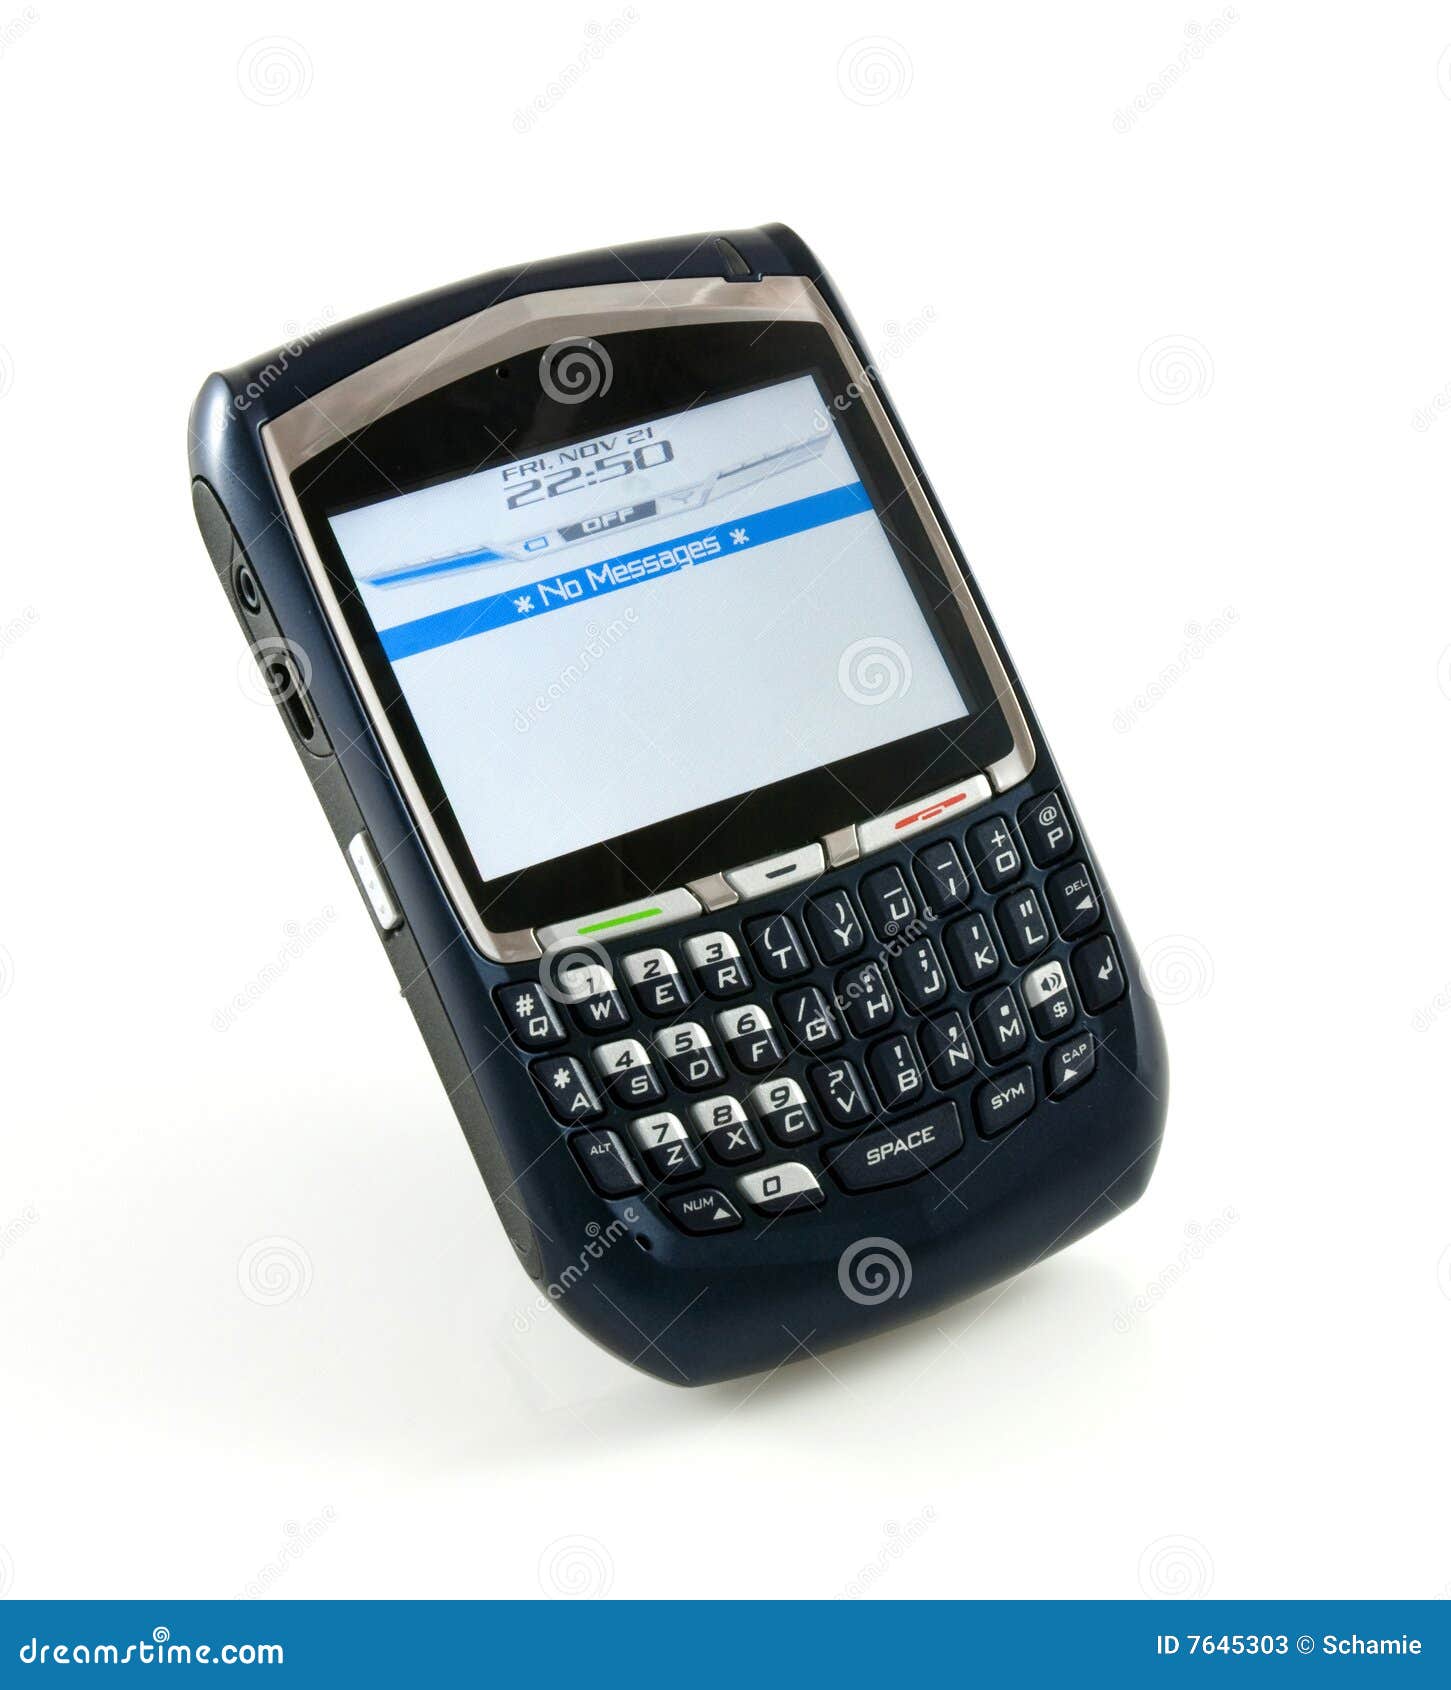 clipart for blackberry phone - photo #32